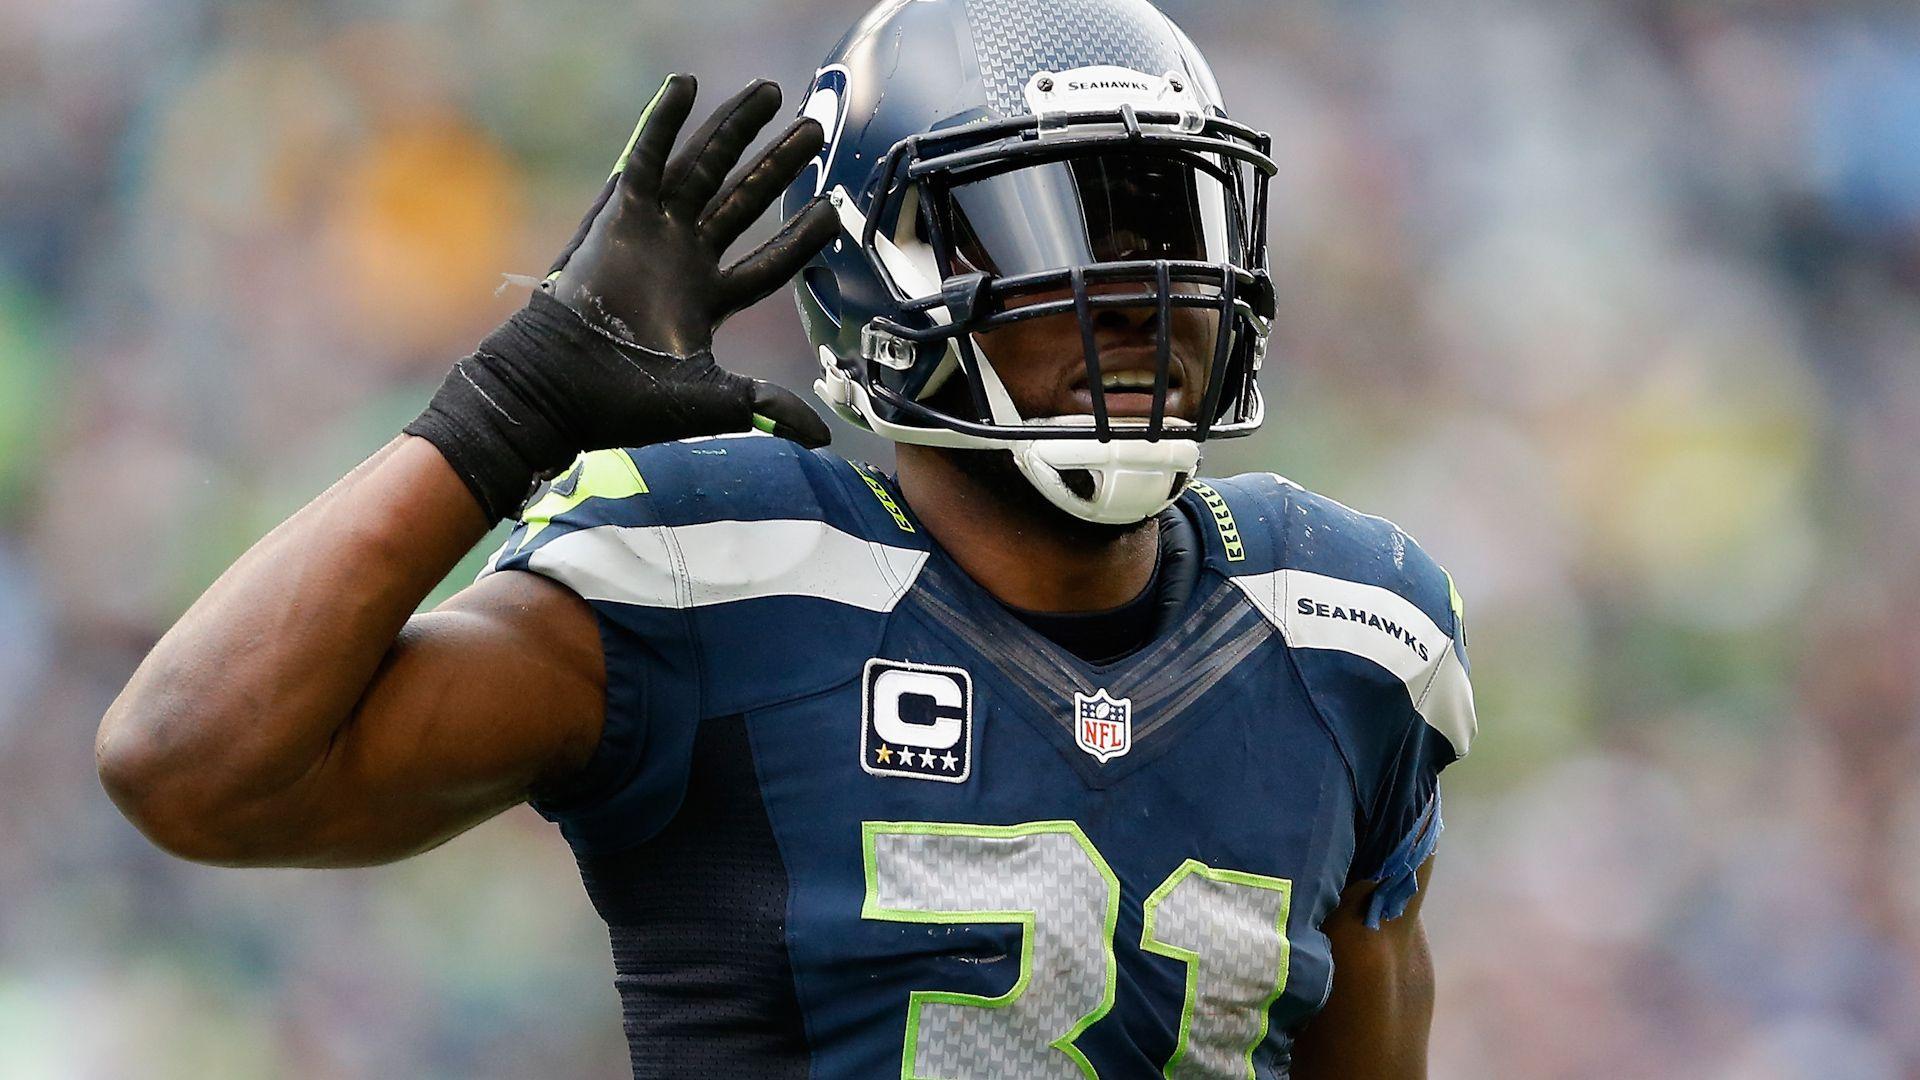 Boomer: I would never fault Kam Chancellor